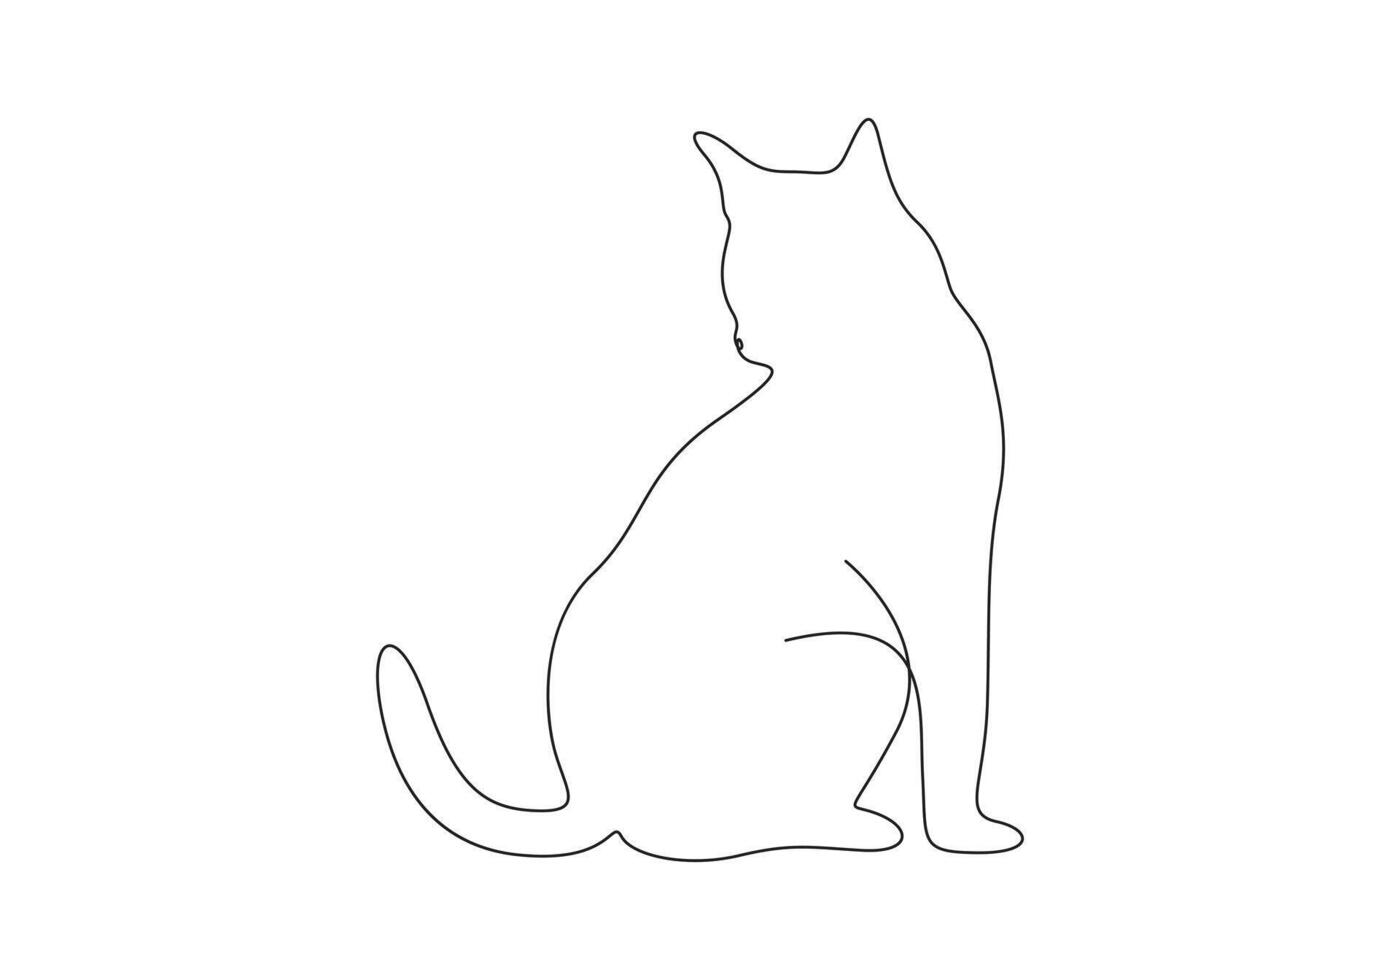 Continuous single line drawing of cute cat digital illustration vector